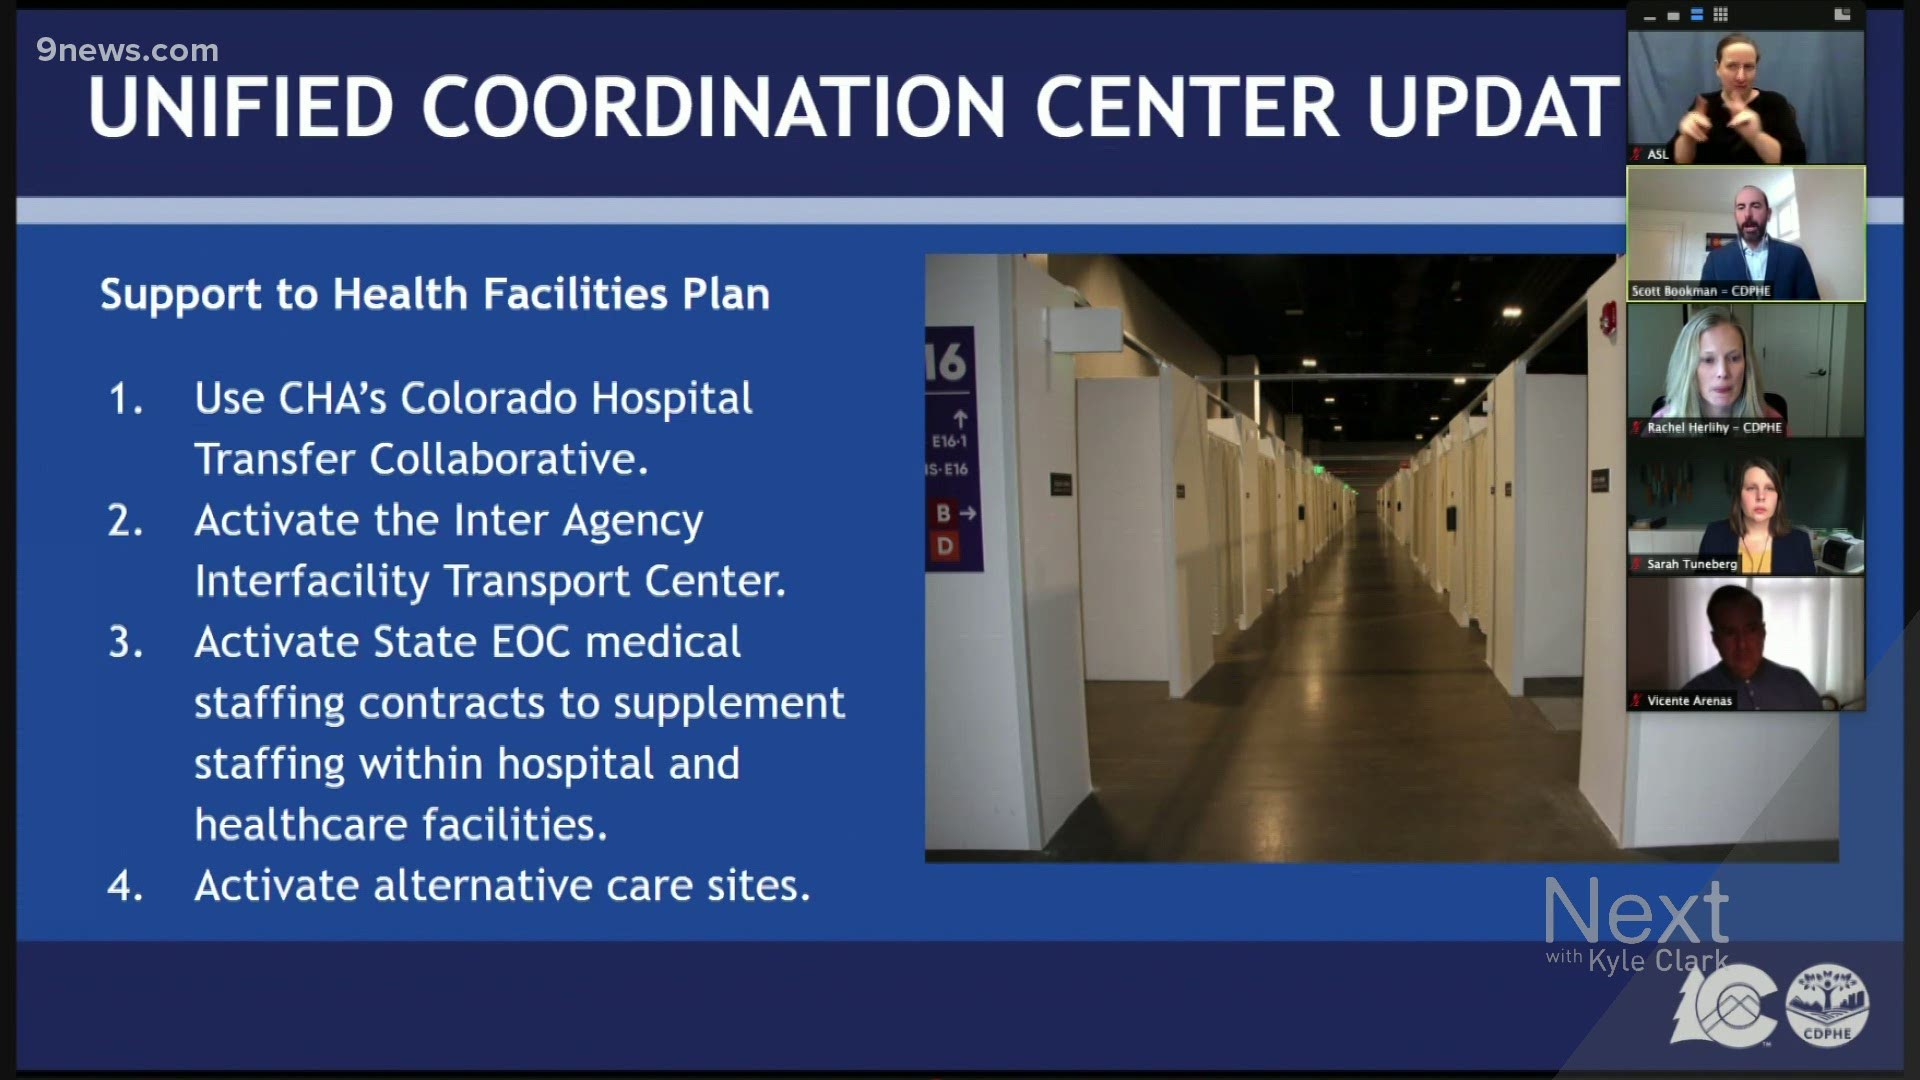 Colorado is preparing its system that will transfer COVID patients to hospitals with capacity, and the state is calling for reinforcements for healthcare workers.